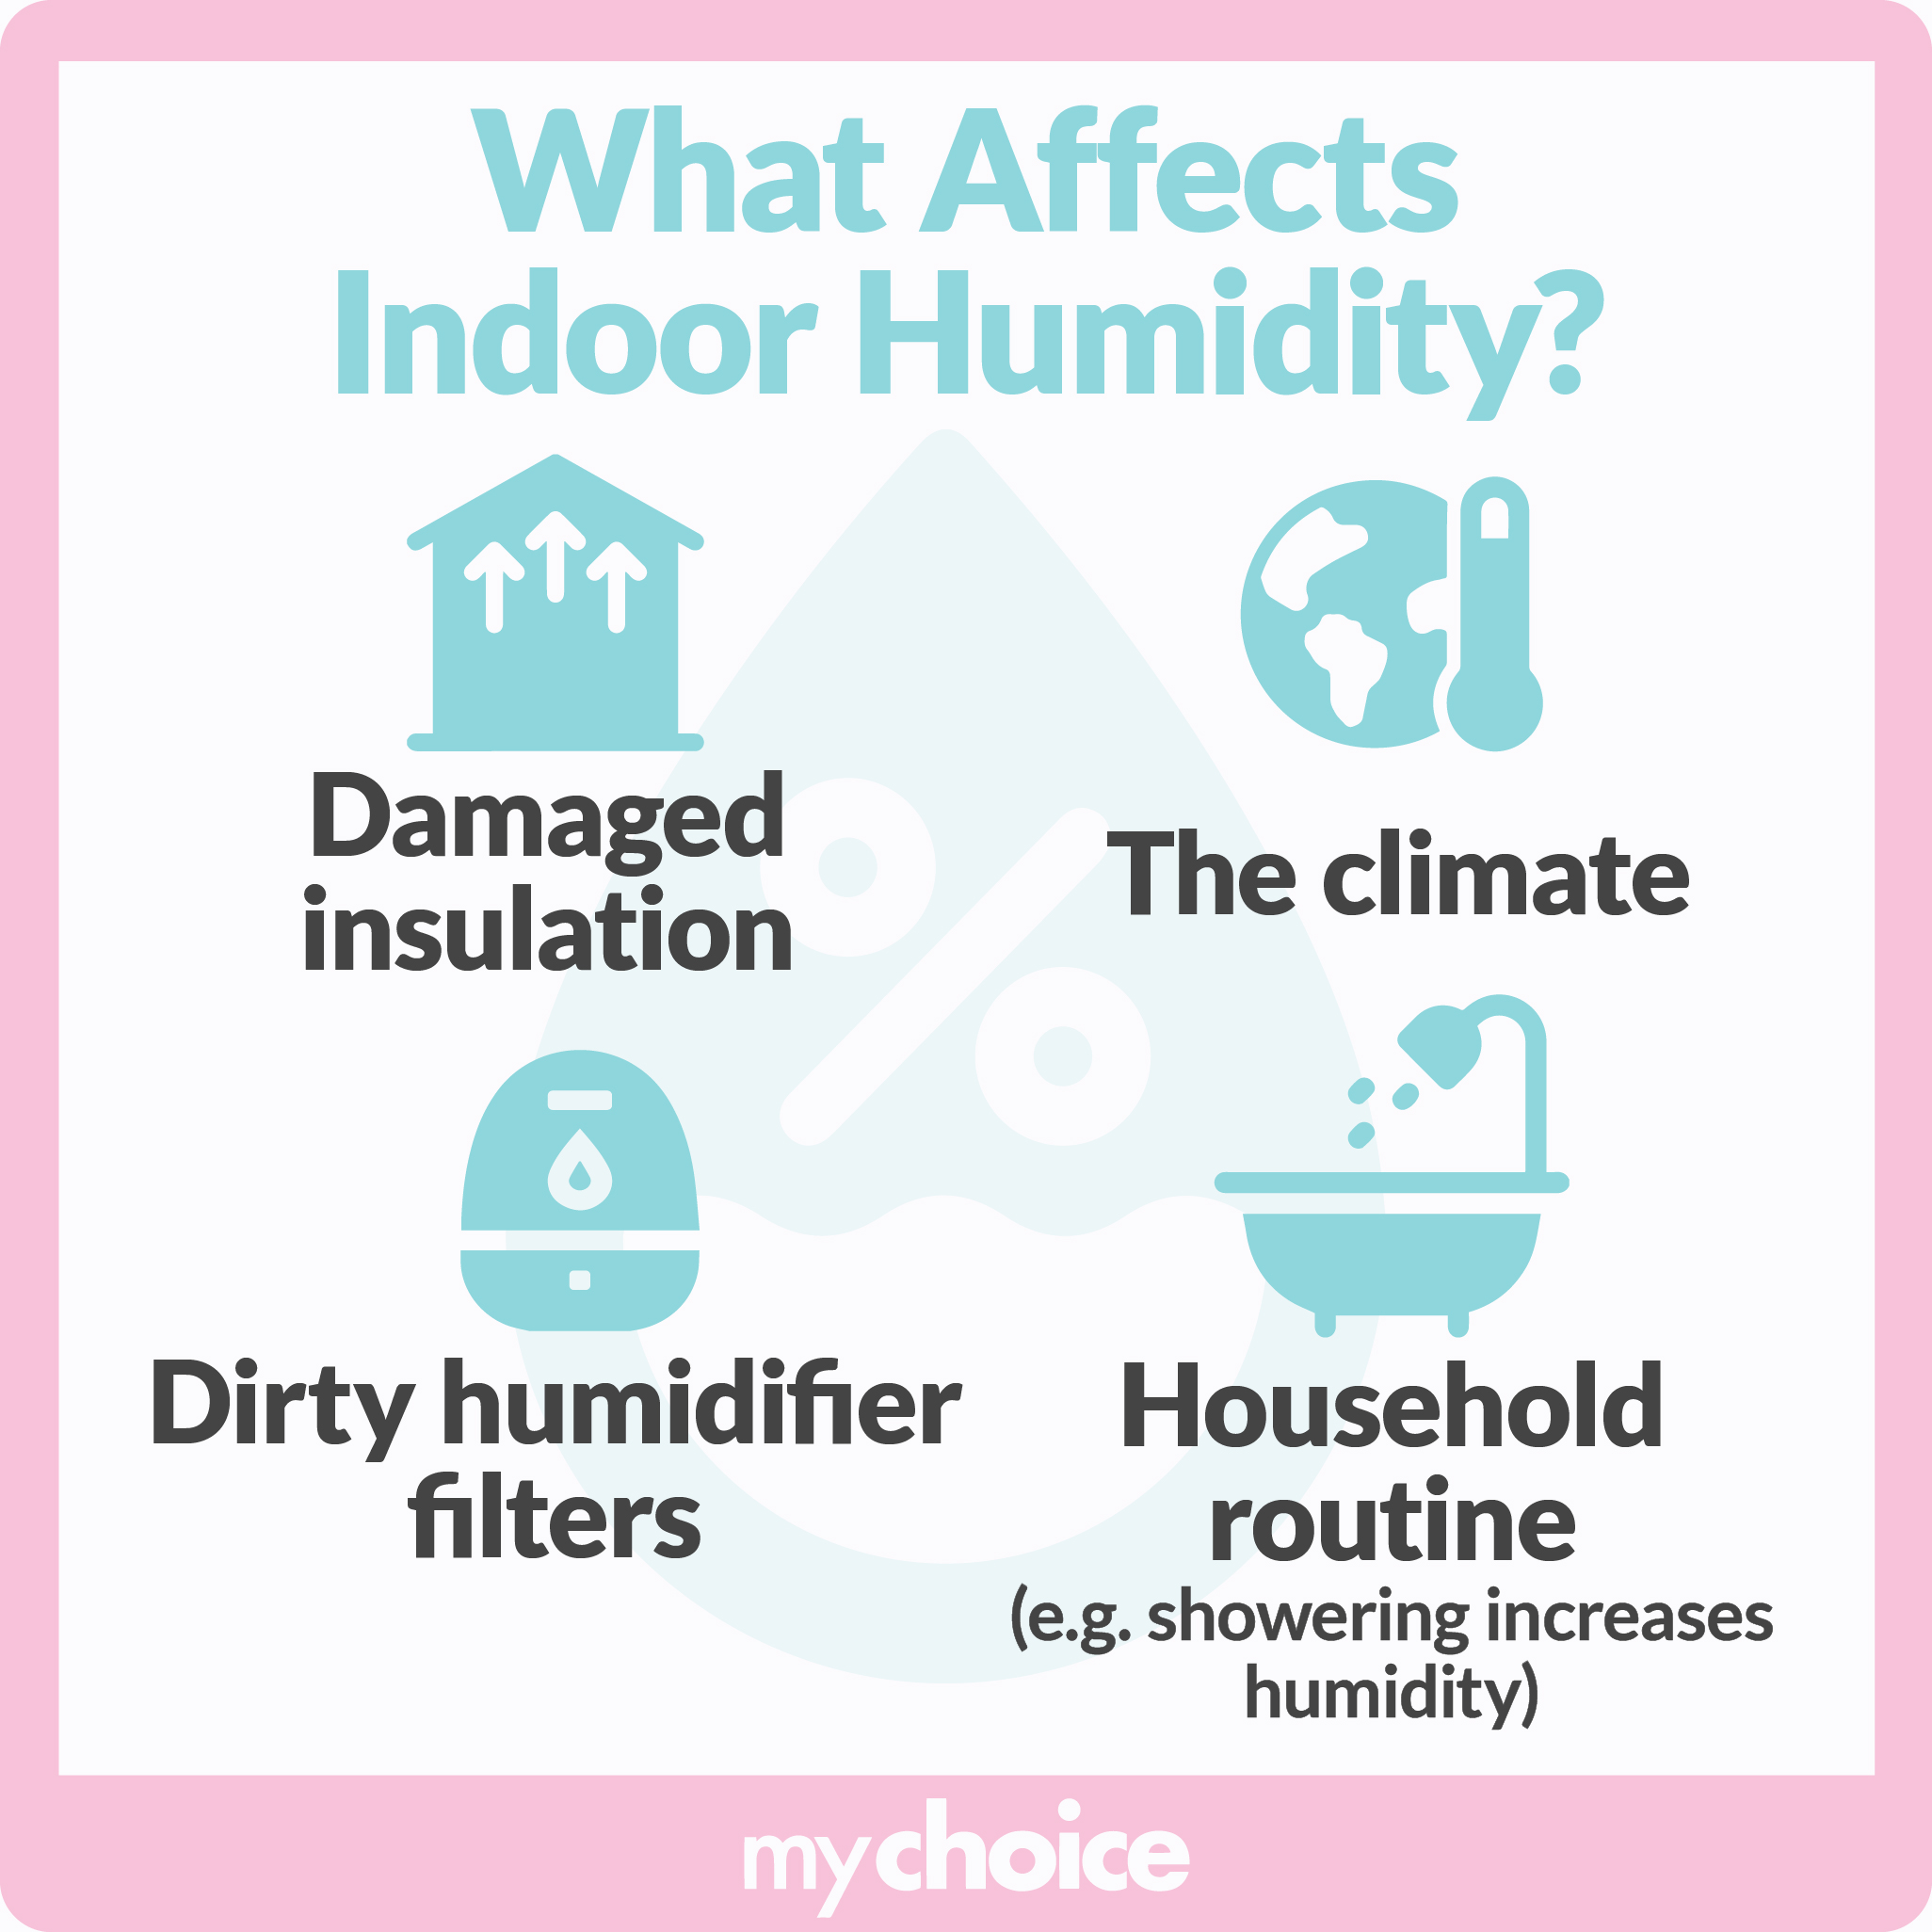 What Affects Indoor Humidity?